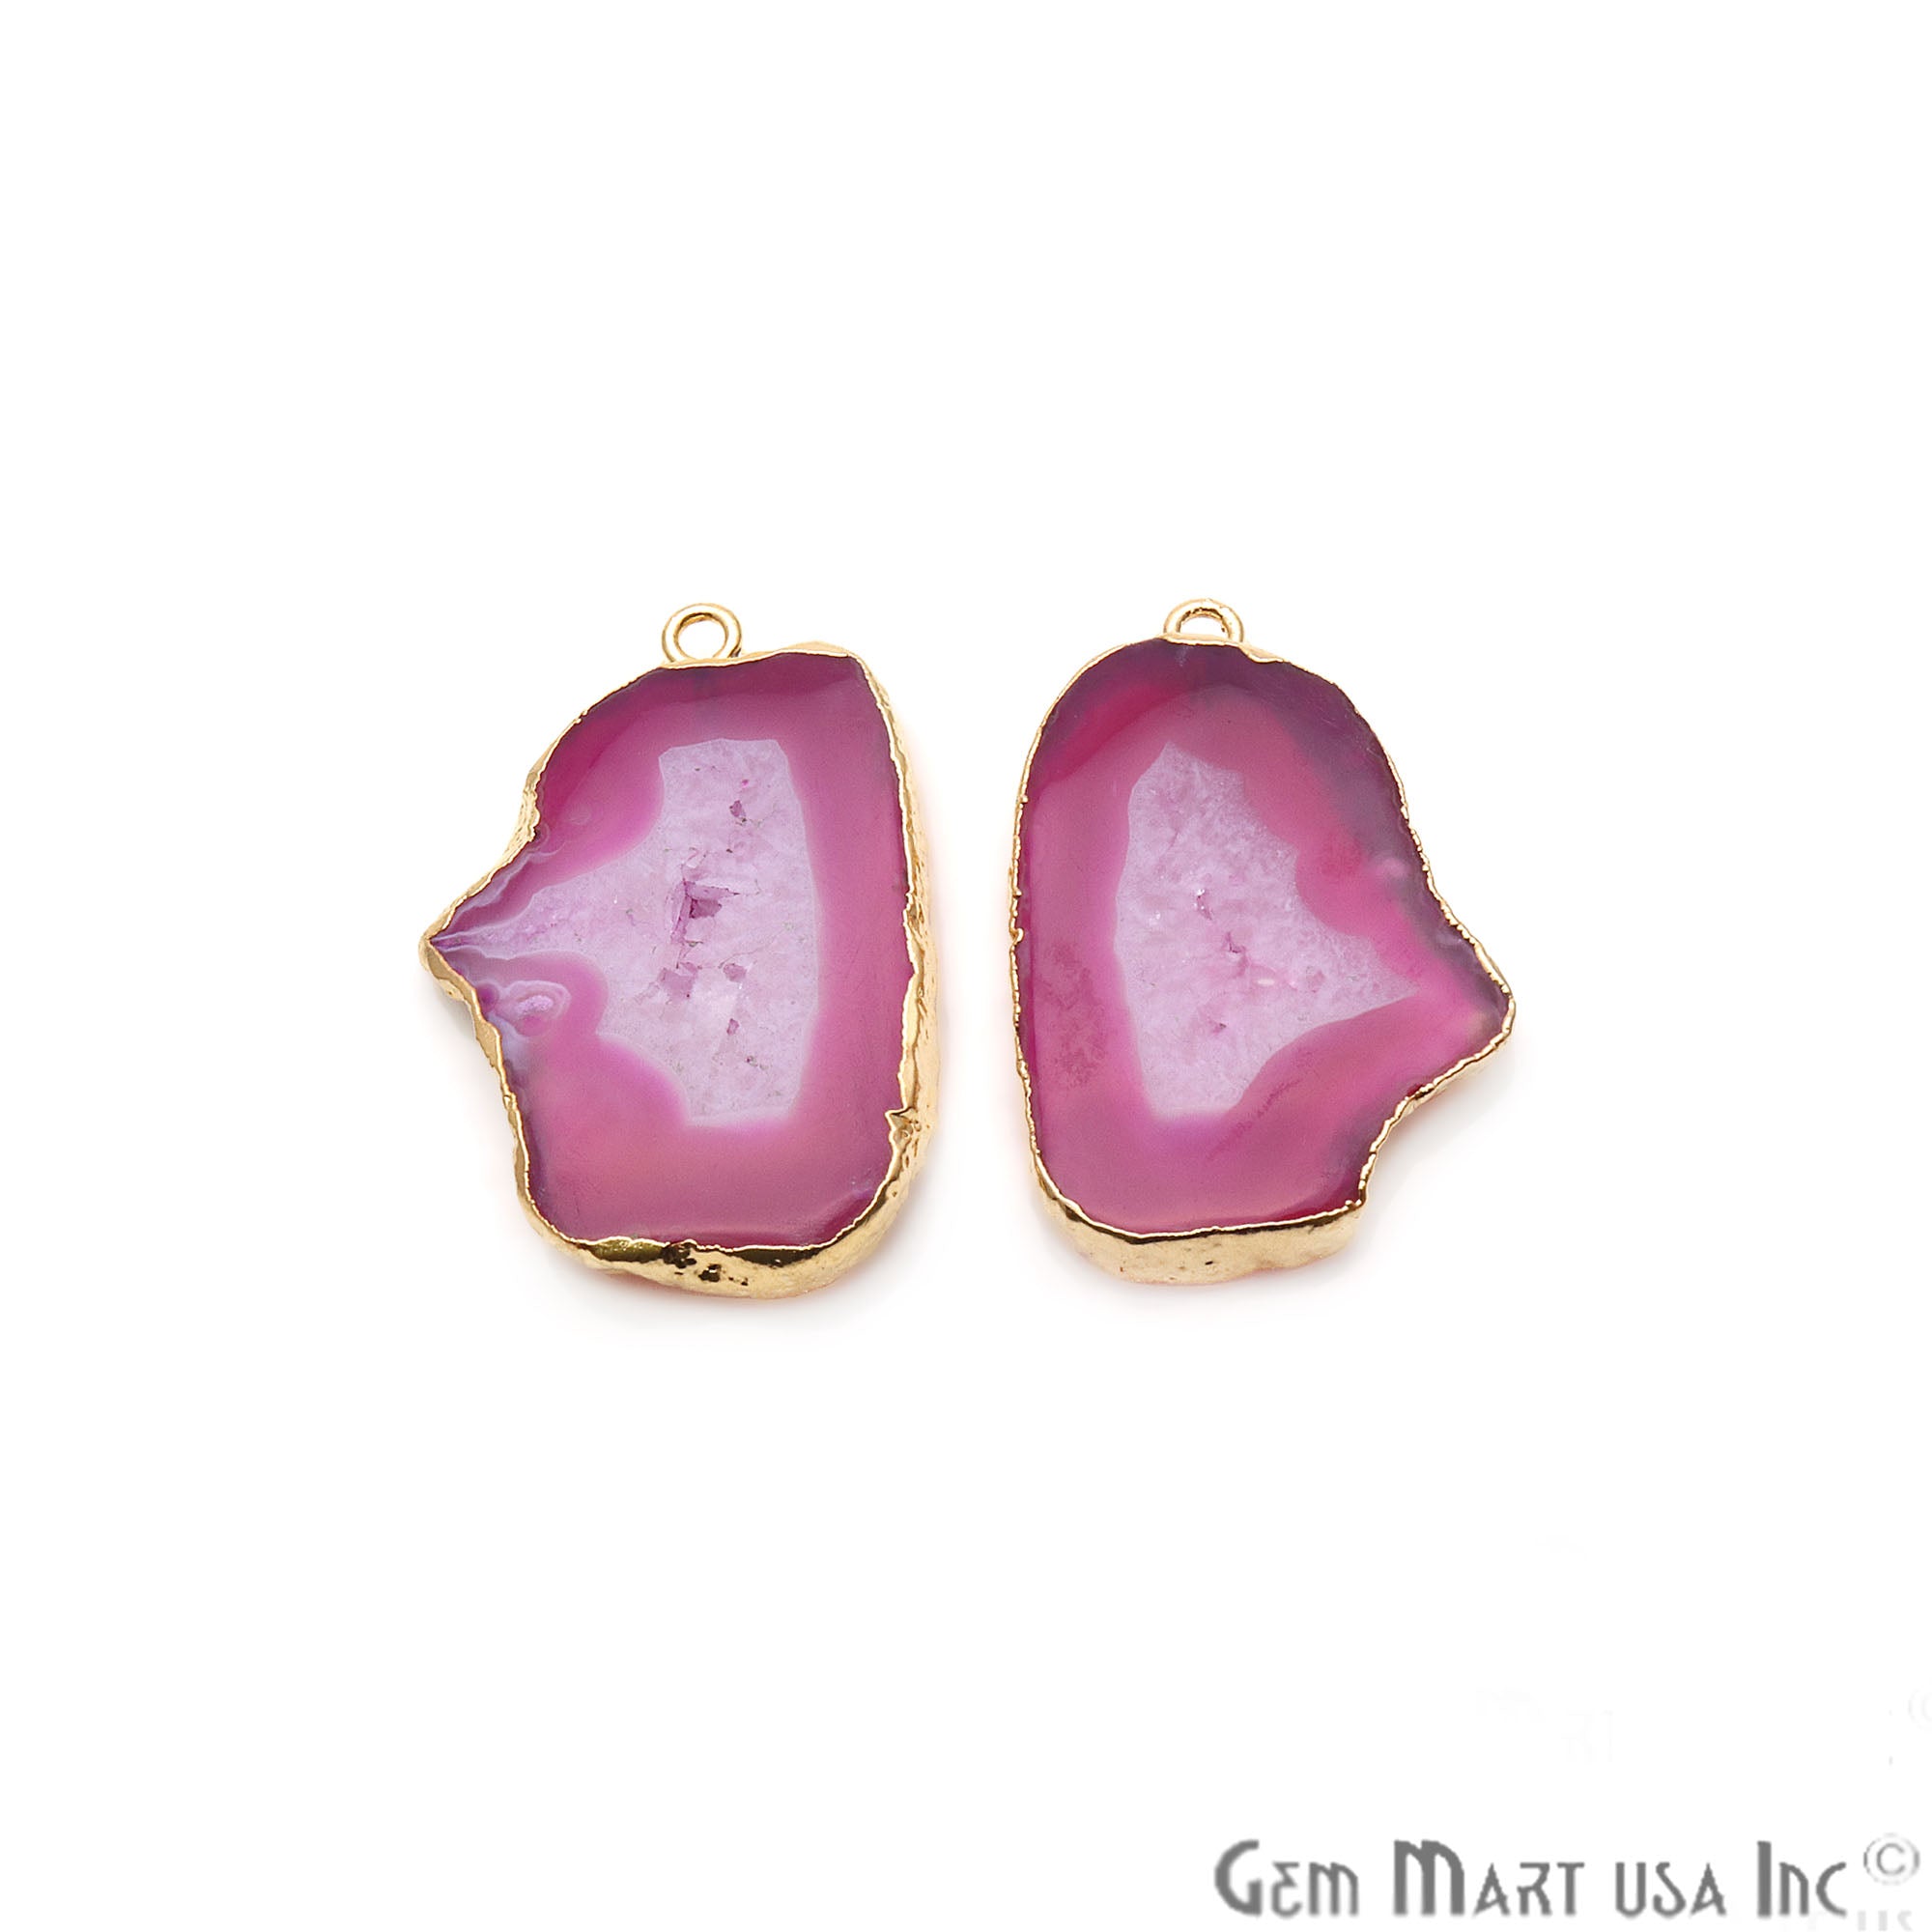 Agate Slice 36x22mm Organic Gold Electroplated Gemstone Earring Connector 1 Pair - GemMartUSA